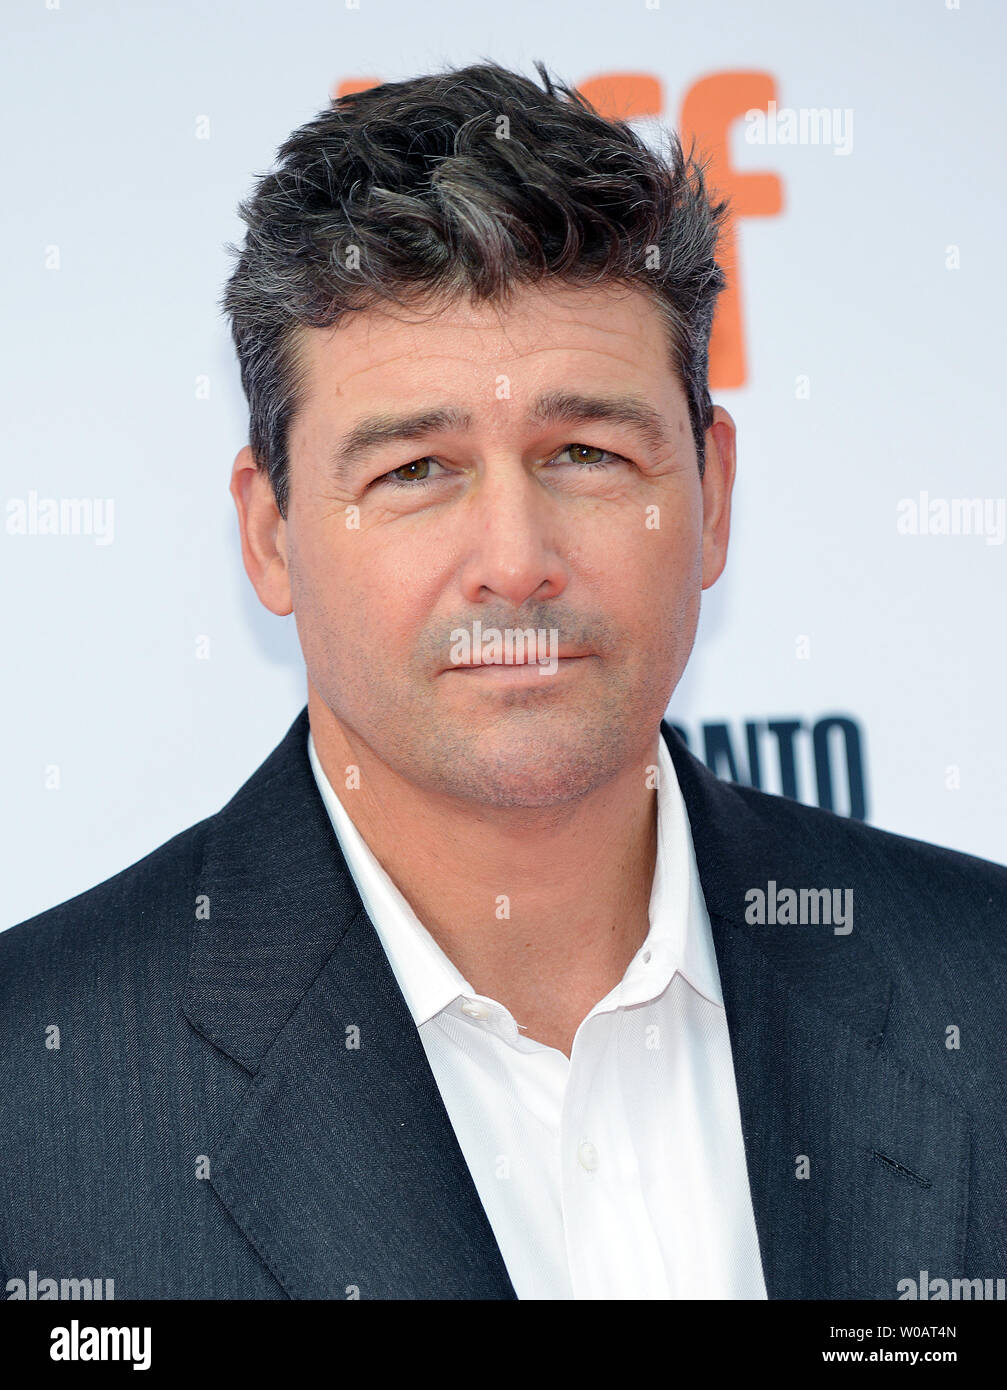 Kyle Chandler arrives at the Toronto International Film Festival premiere of 'Manchester By The Sea' at the Princess of Wales Theatre in Toronto, Canada on September 13, 2016. Photo by Christine Chew/UPI Stock Photo